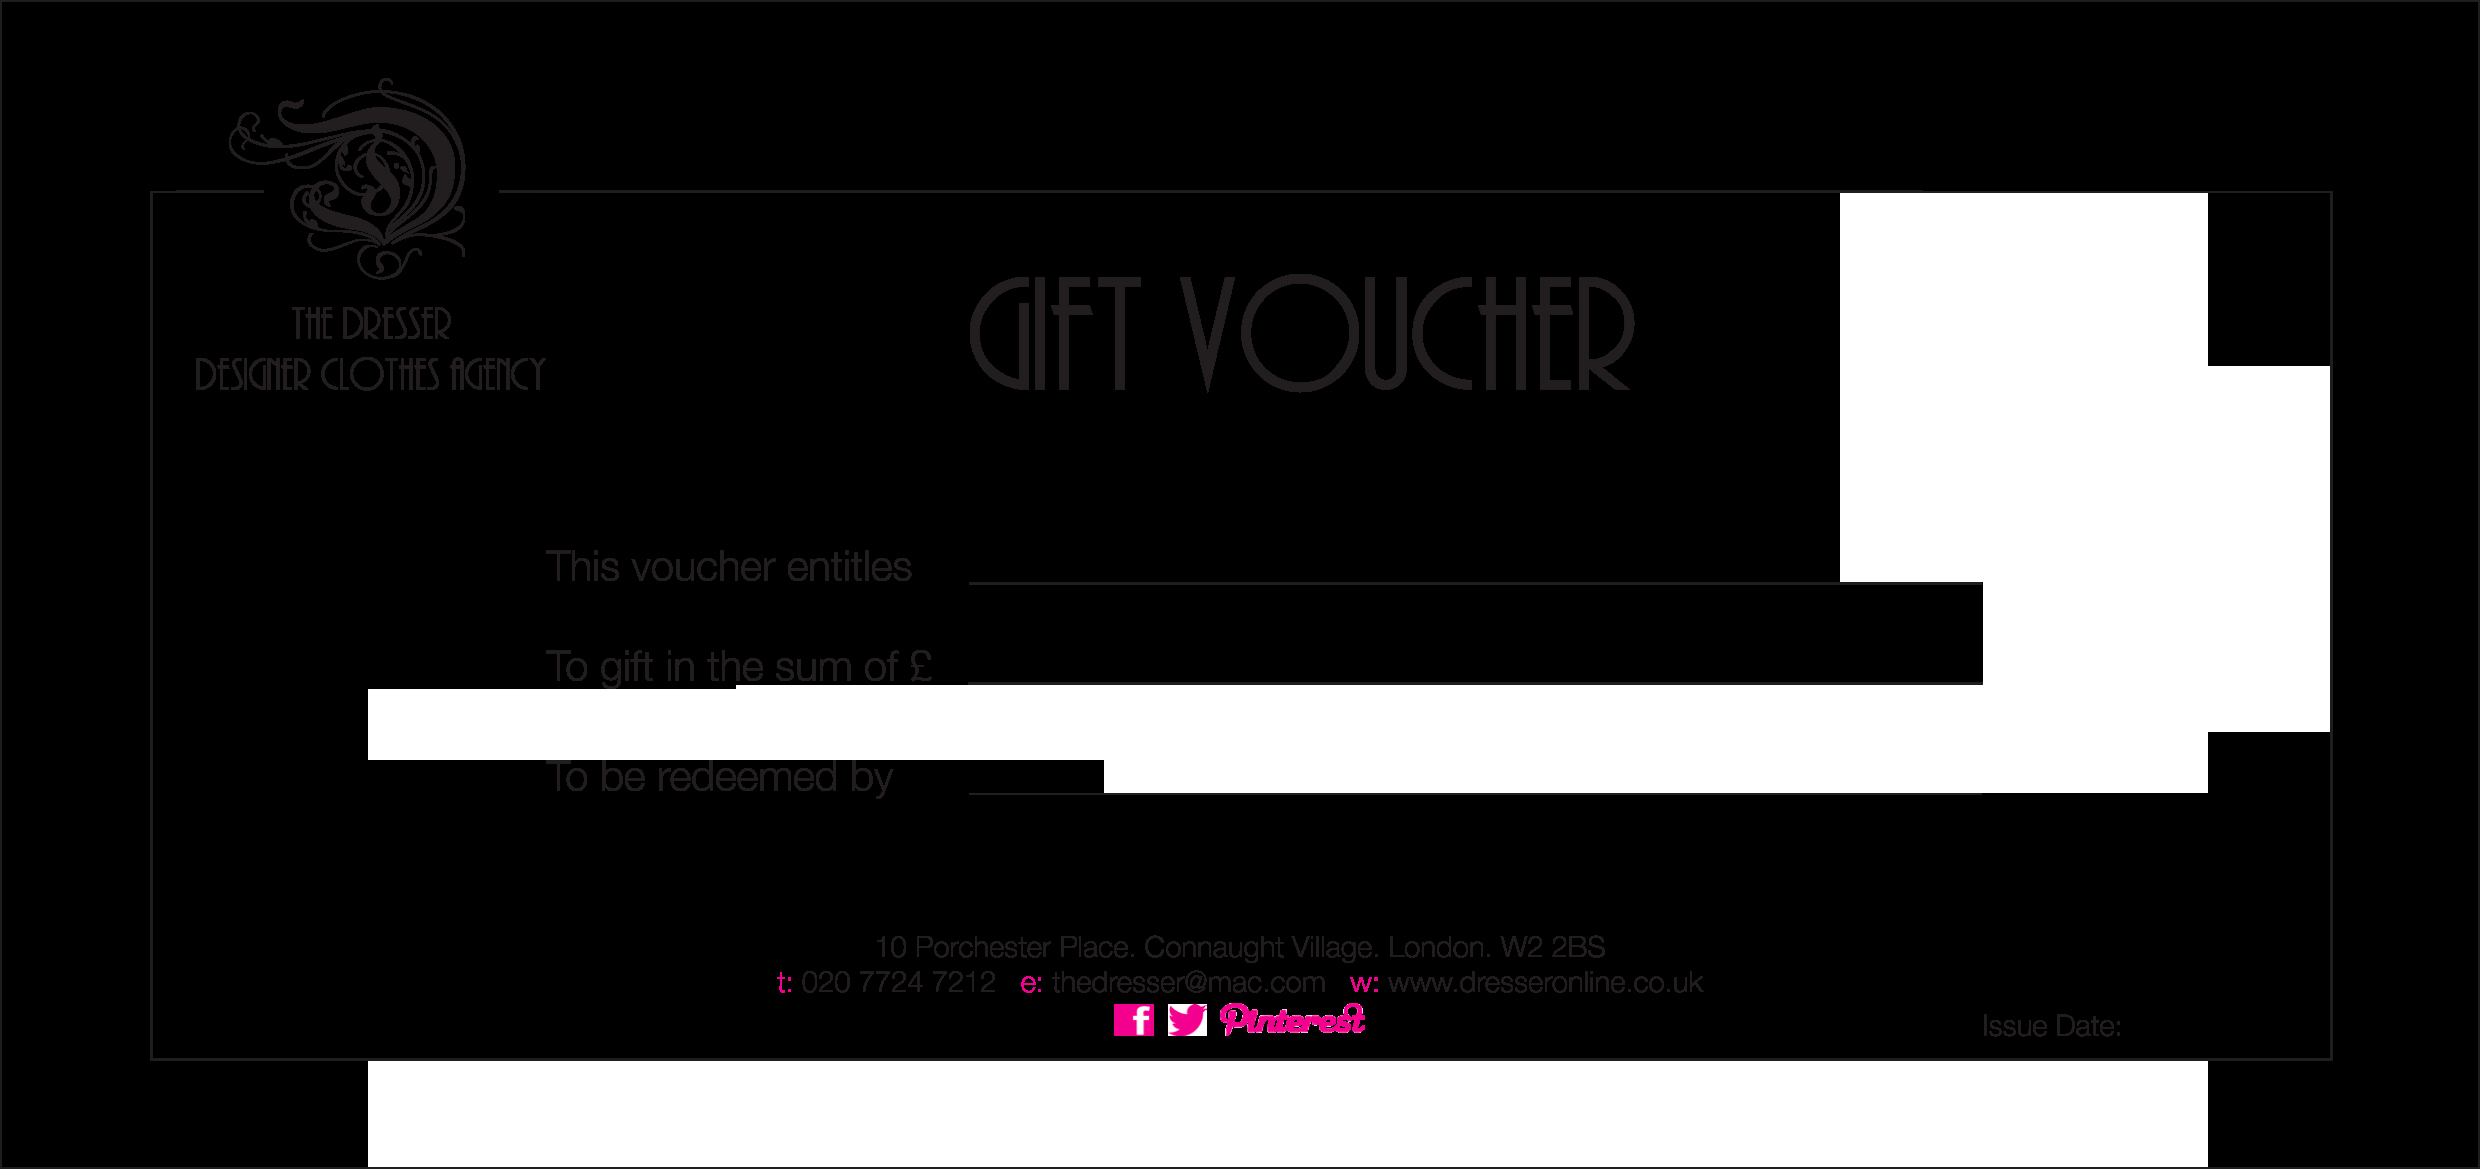 Gift Certificate Template Microsoft Word New Gift Voucher Template Word Free Download